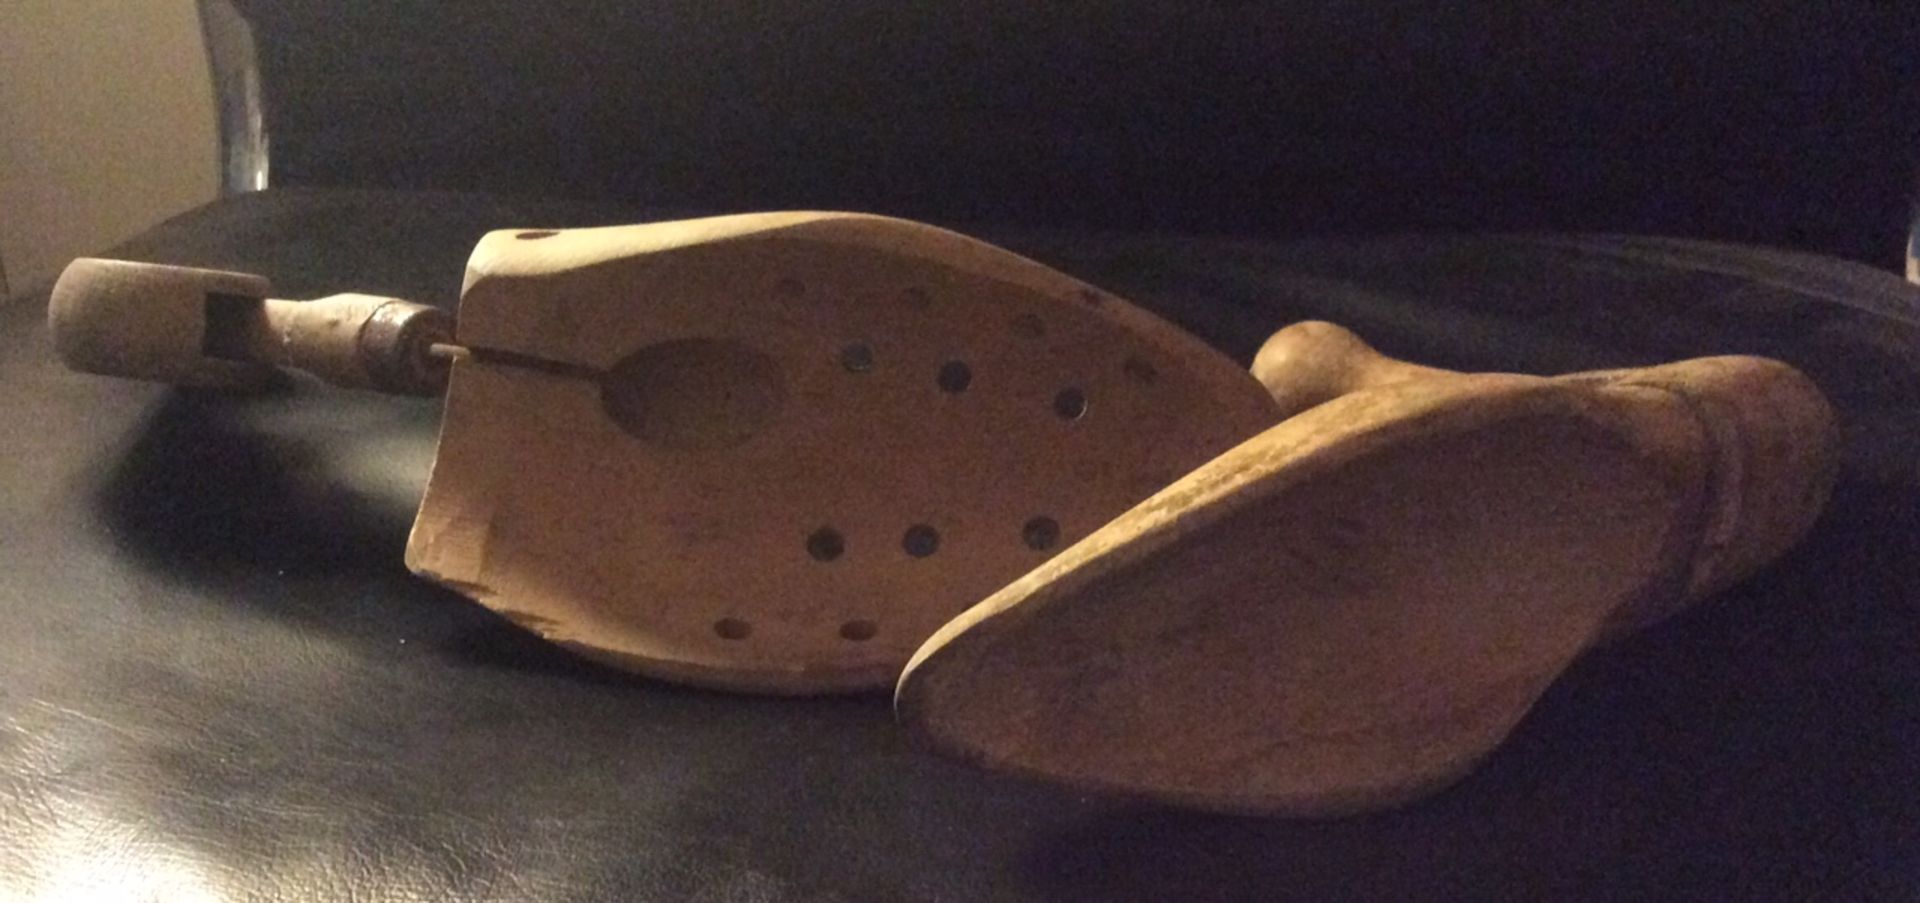 Pair of antique/vintage wooden shoe lasts - Image 3 of 3